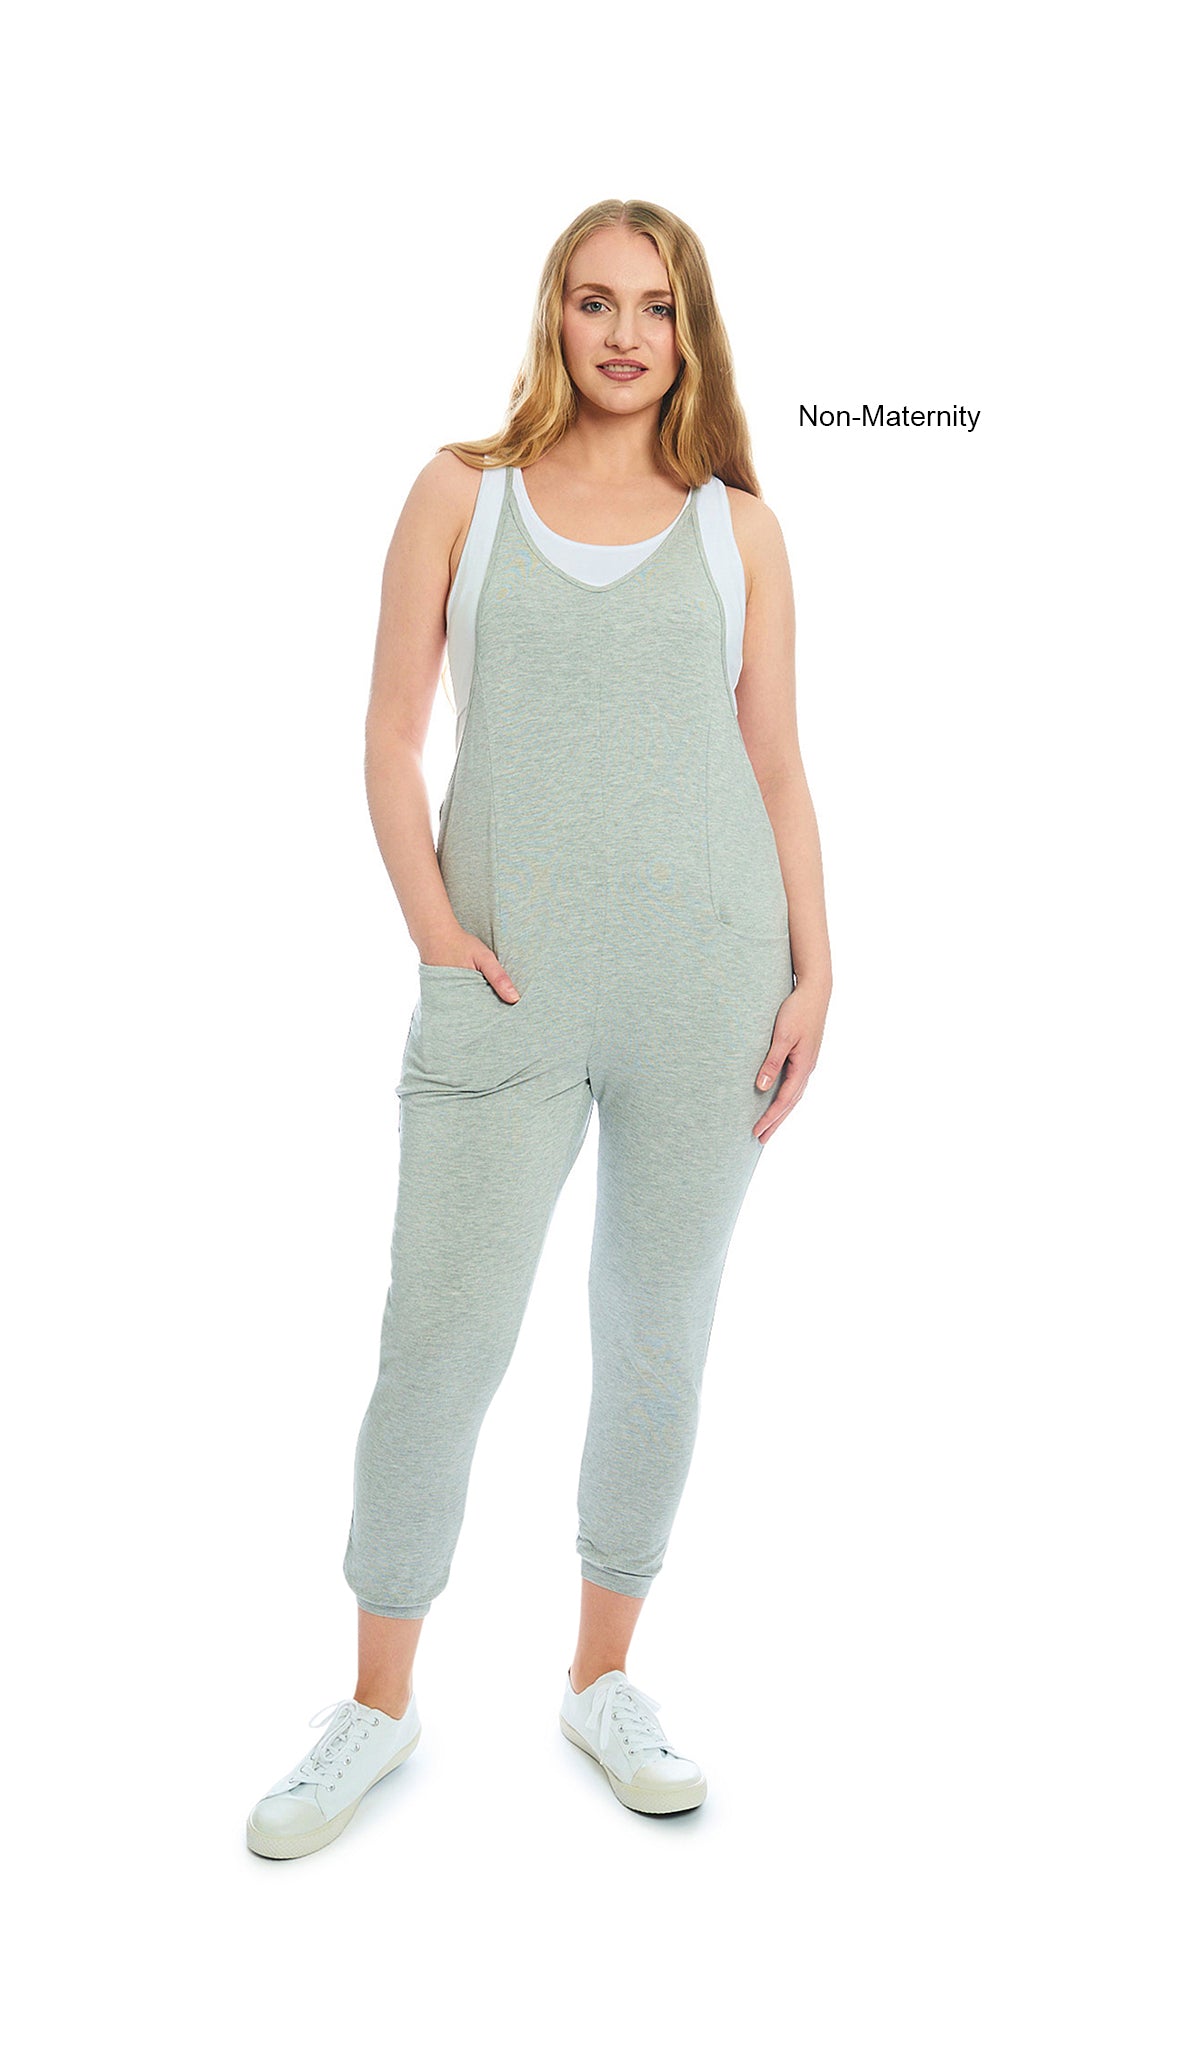 Heather Grey Solid Brandi Romper. Woman wearing Brandi romper as non-maternity over white Kara Tank with both hands in romper pockets.